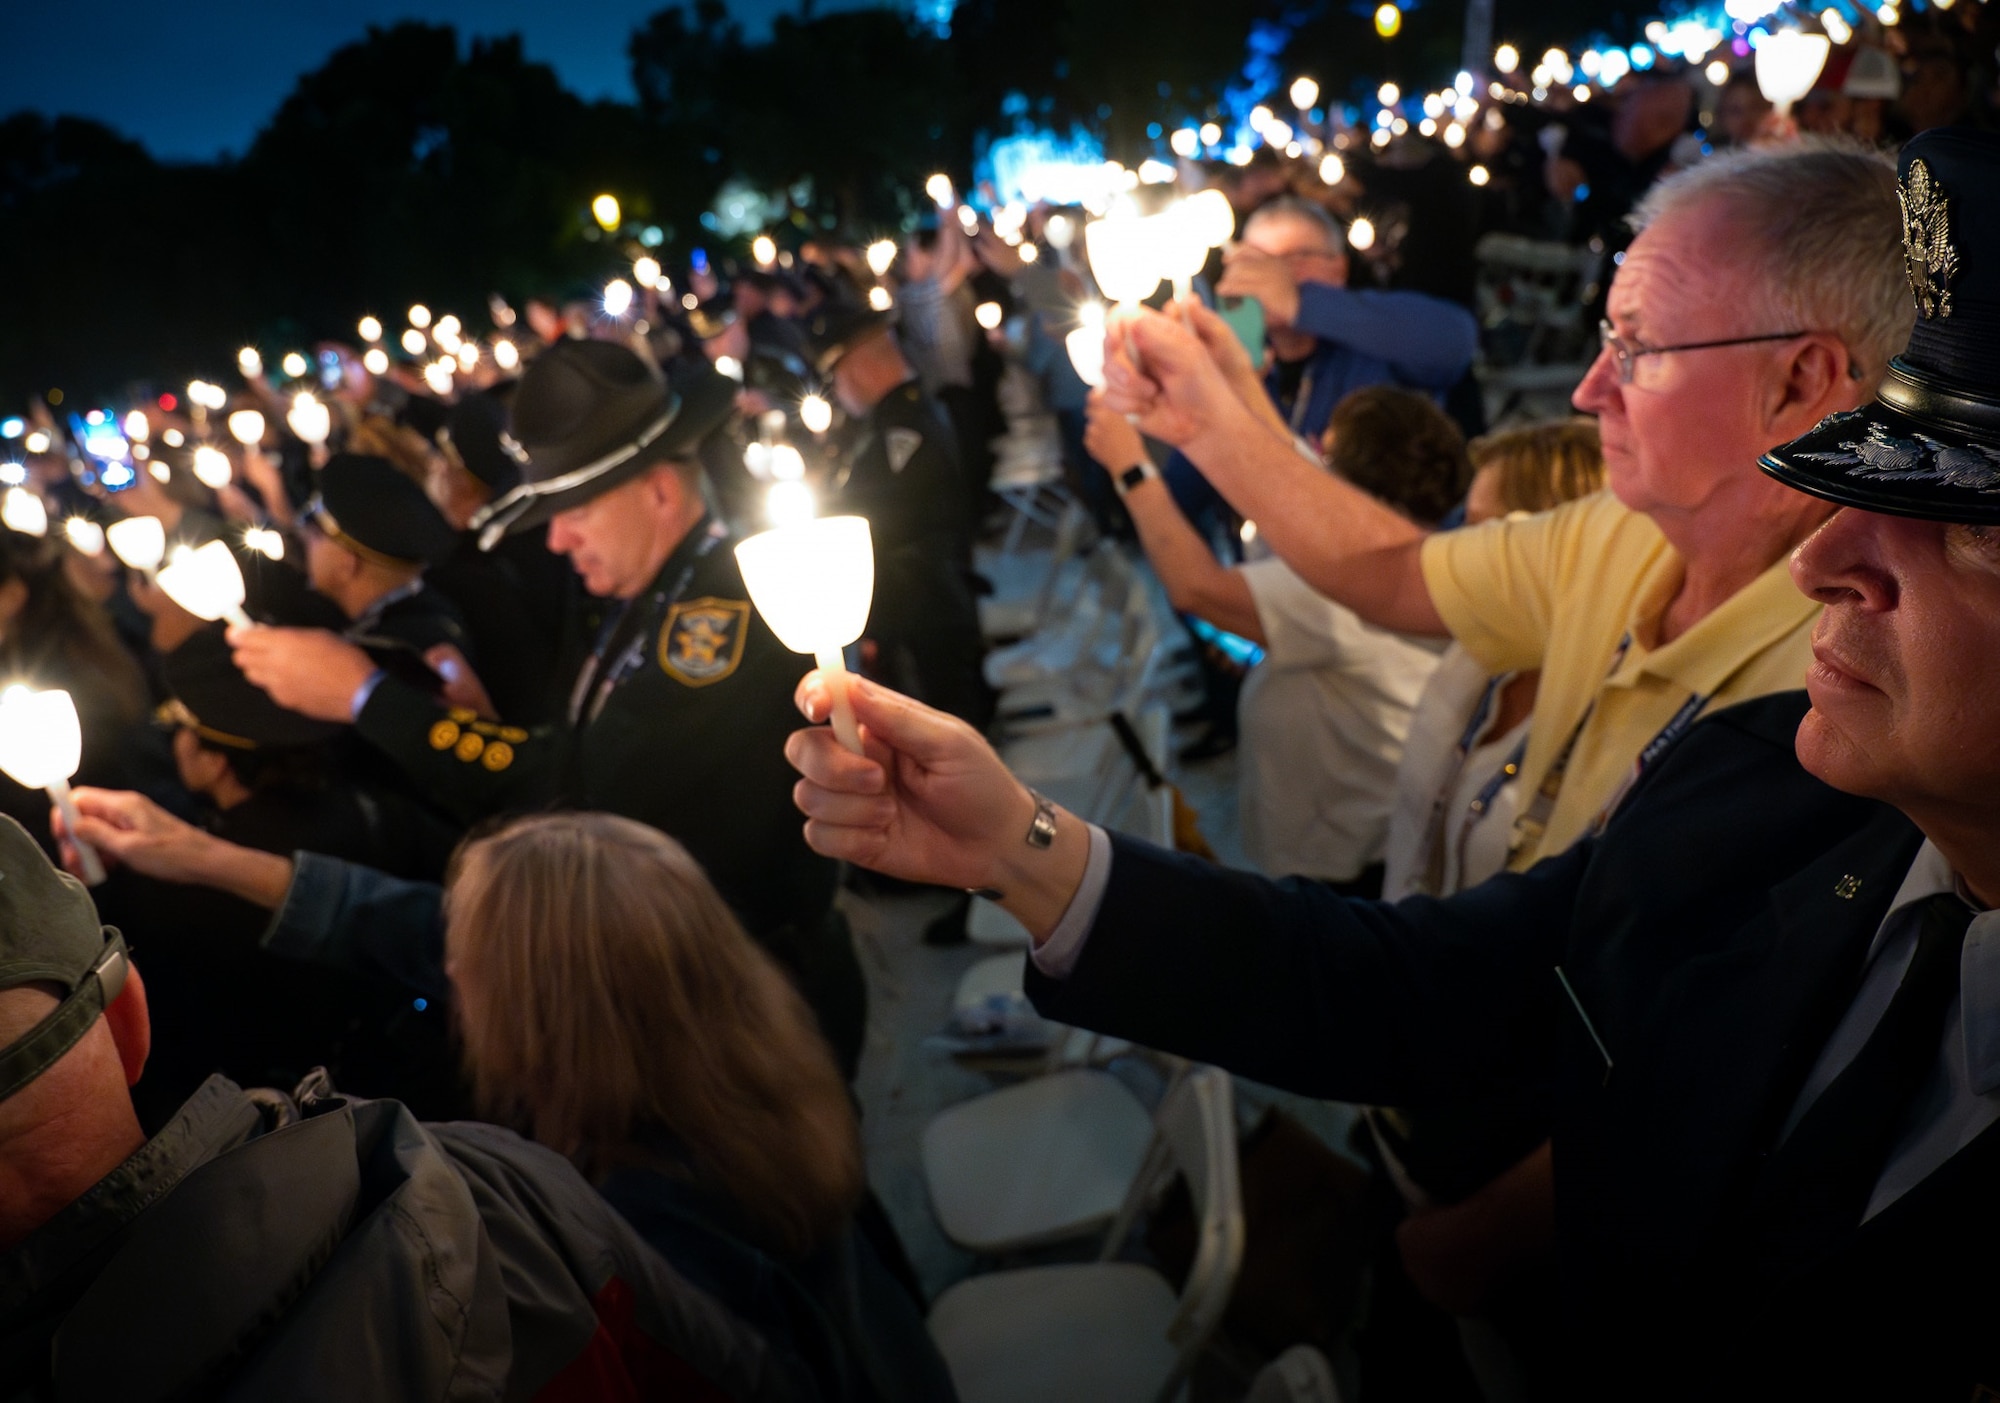 Brig. Gen. Terry Bullard, OSI commander, right, holds a candle during the 35th Annual Candlelight Vigil, May 13, as part of several events during National Police Week 2023 in Washington, D.C. Hundreds of law enforcement officers and families gathered at the National Mall to honor police officers killed in the line of duty. Col. Eugene Smith, an OSI officer killed in a plane crash in 1952, was honored after being etched into the National Law Enforcement Officers Memorial this year. (U.S. Air Force Photo by Thomas Brading)